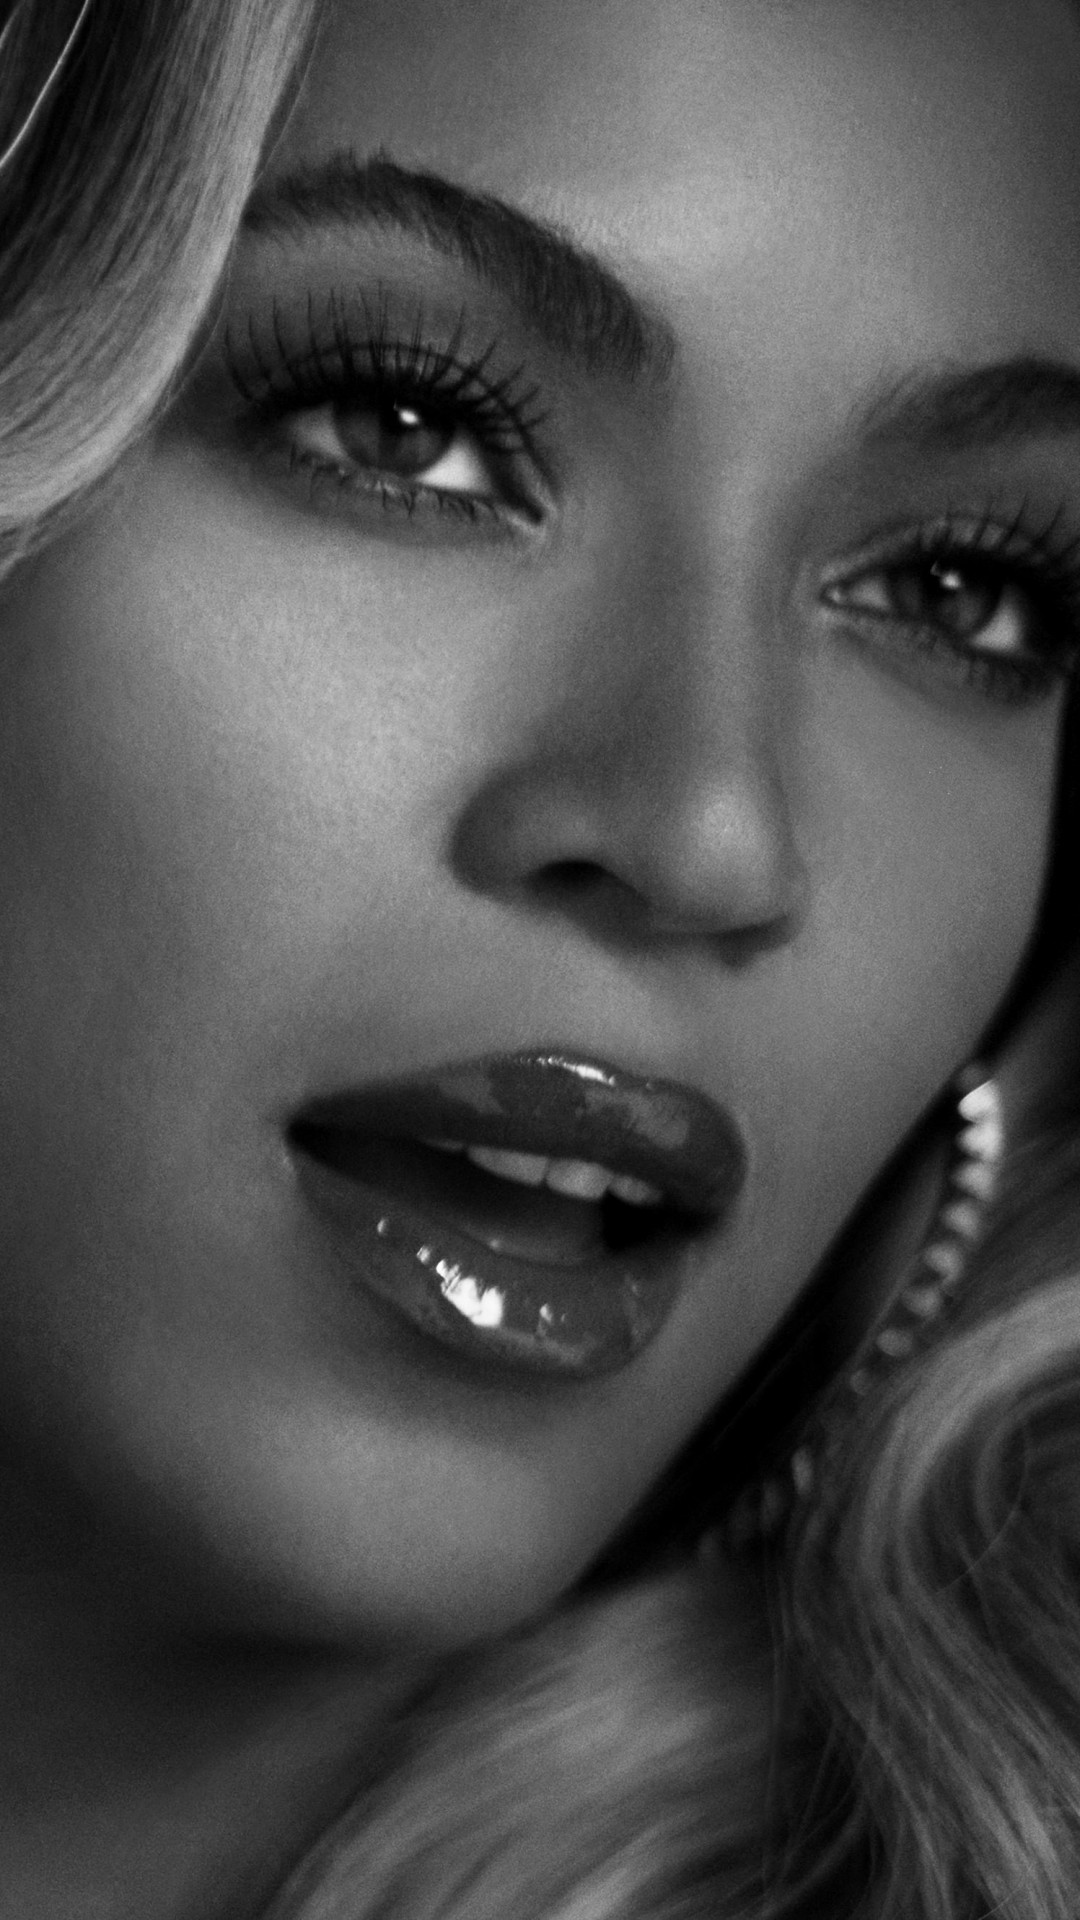 Beyonce in Black & White Wallpaper for HTC One